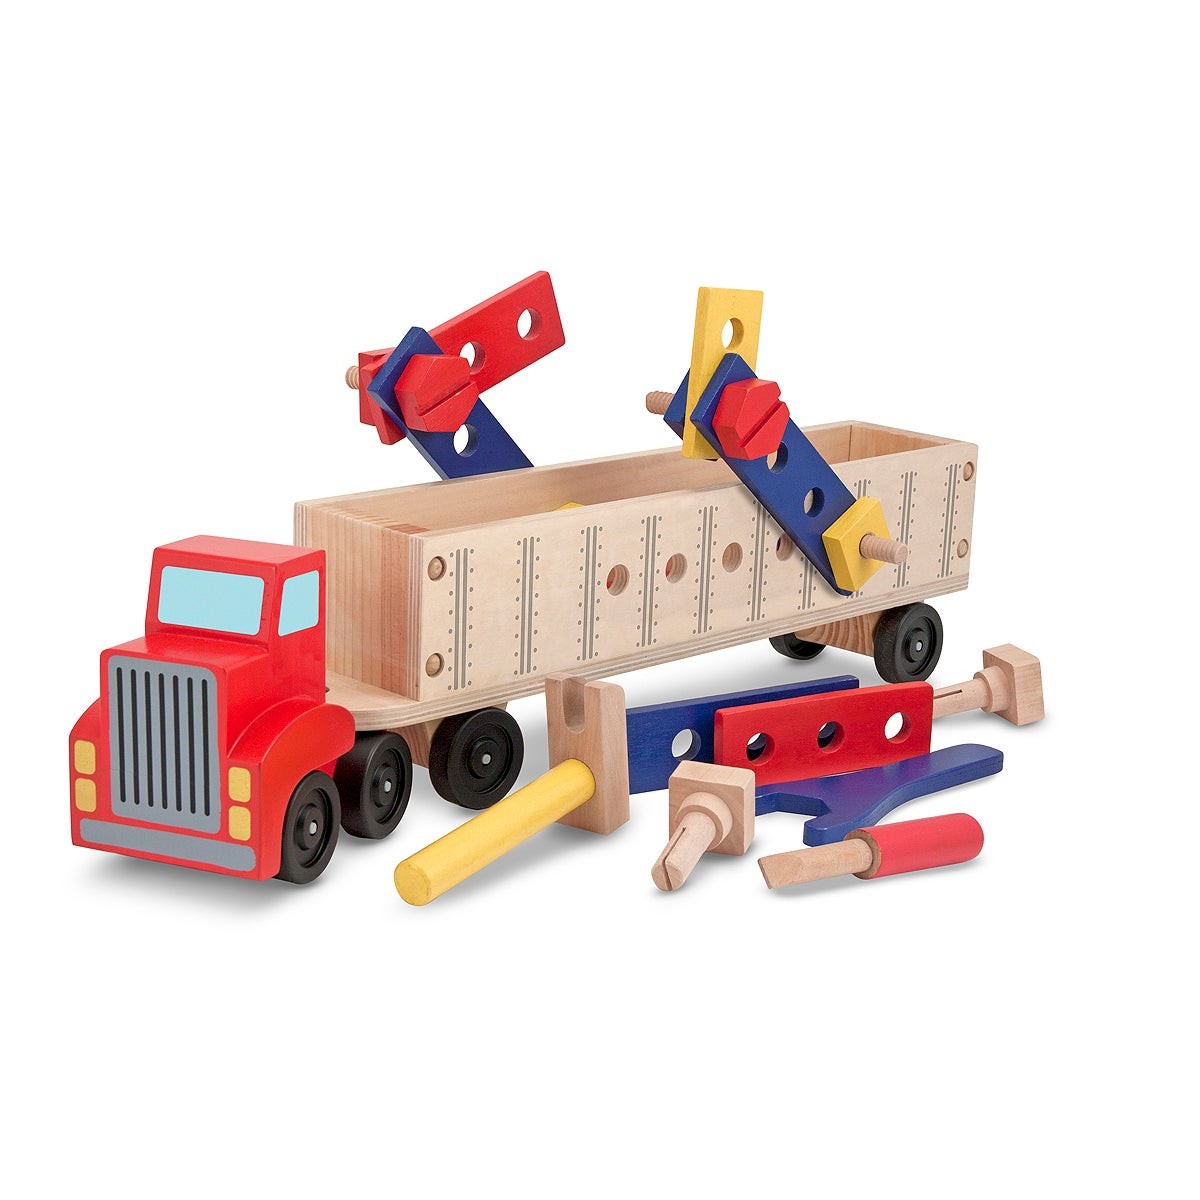 Big Rig Truck Wooden Building Set Ages 3+ Years